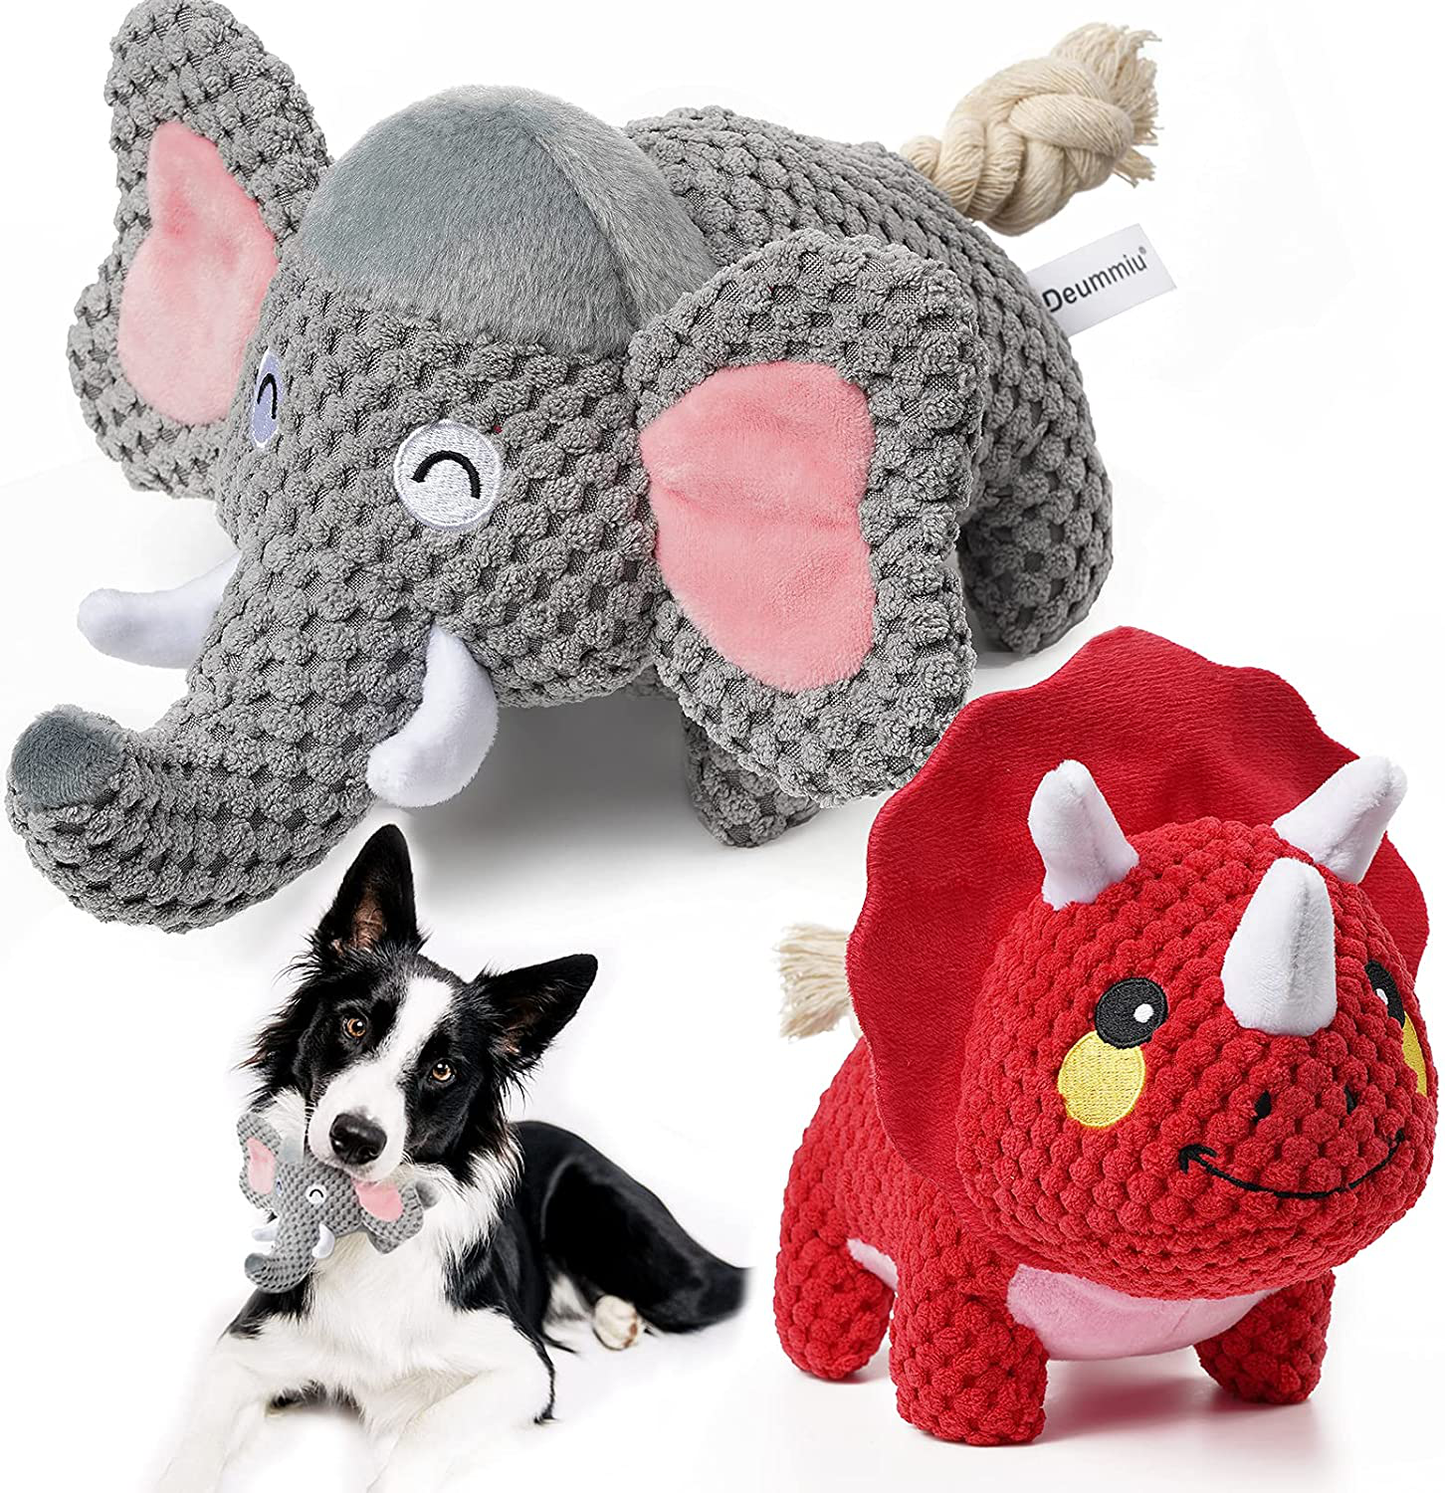 Deummiu Dog Toys,2 Pack Squeaky Plush Dog Toys with Crinkle Papper Cute Stuffed Puppy Toys for Small Medium Large Breed Animals & Pet Supplies > Pet Supplies > Dog Supplies > Dog Toys Deummiu   